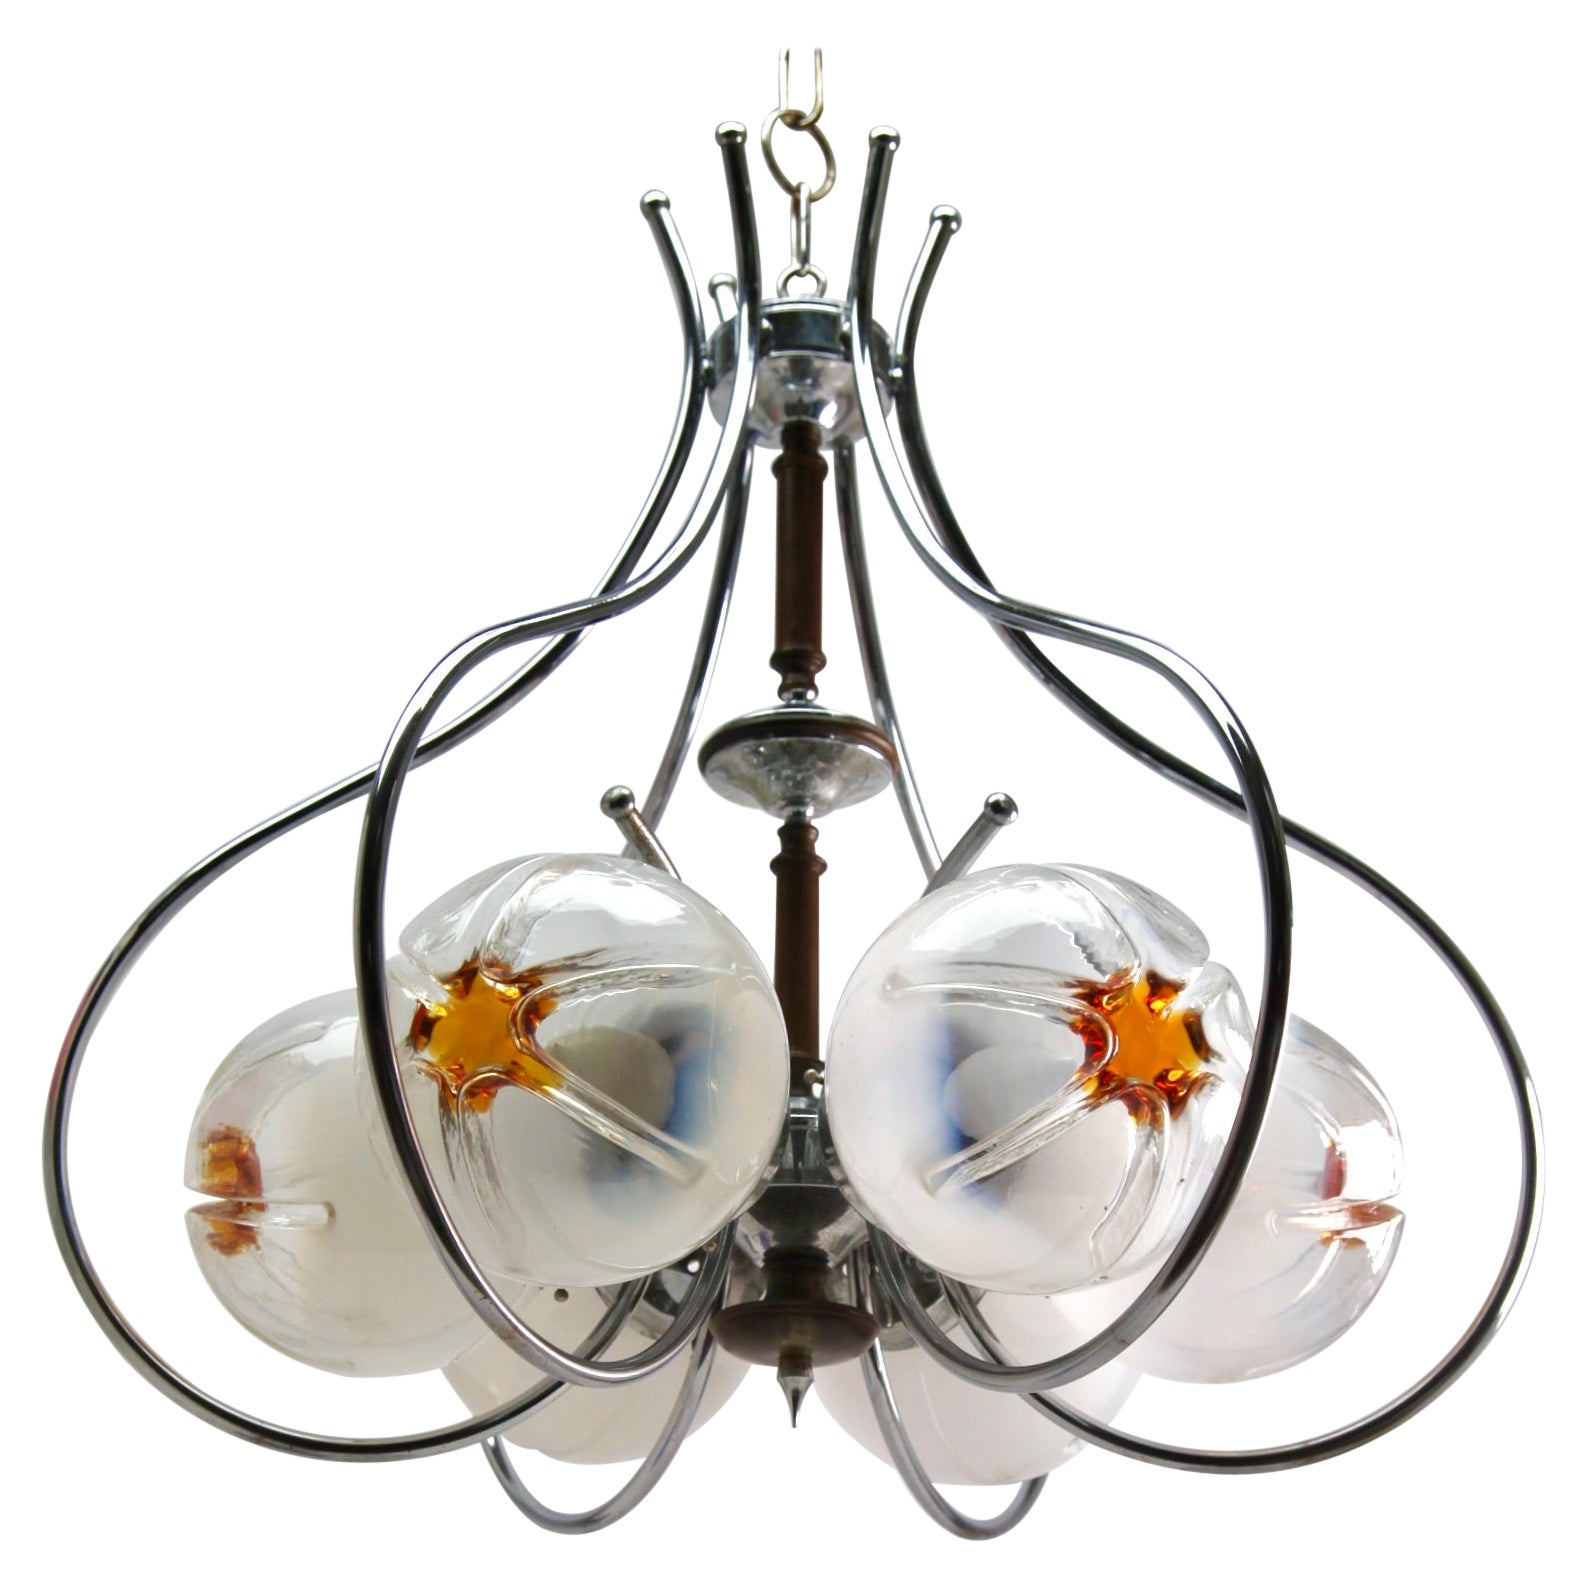 Pendant by Mazzega of Clear Glass with Orange Inclusions and Wooden Detail